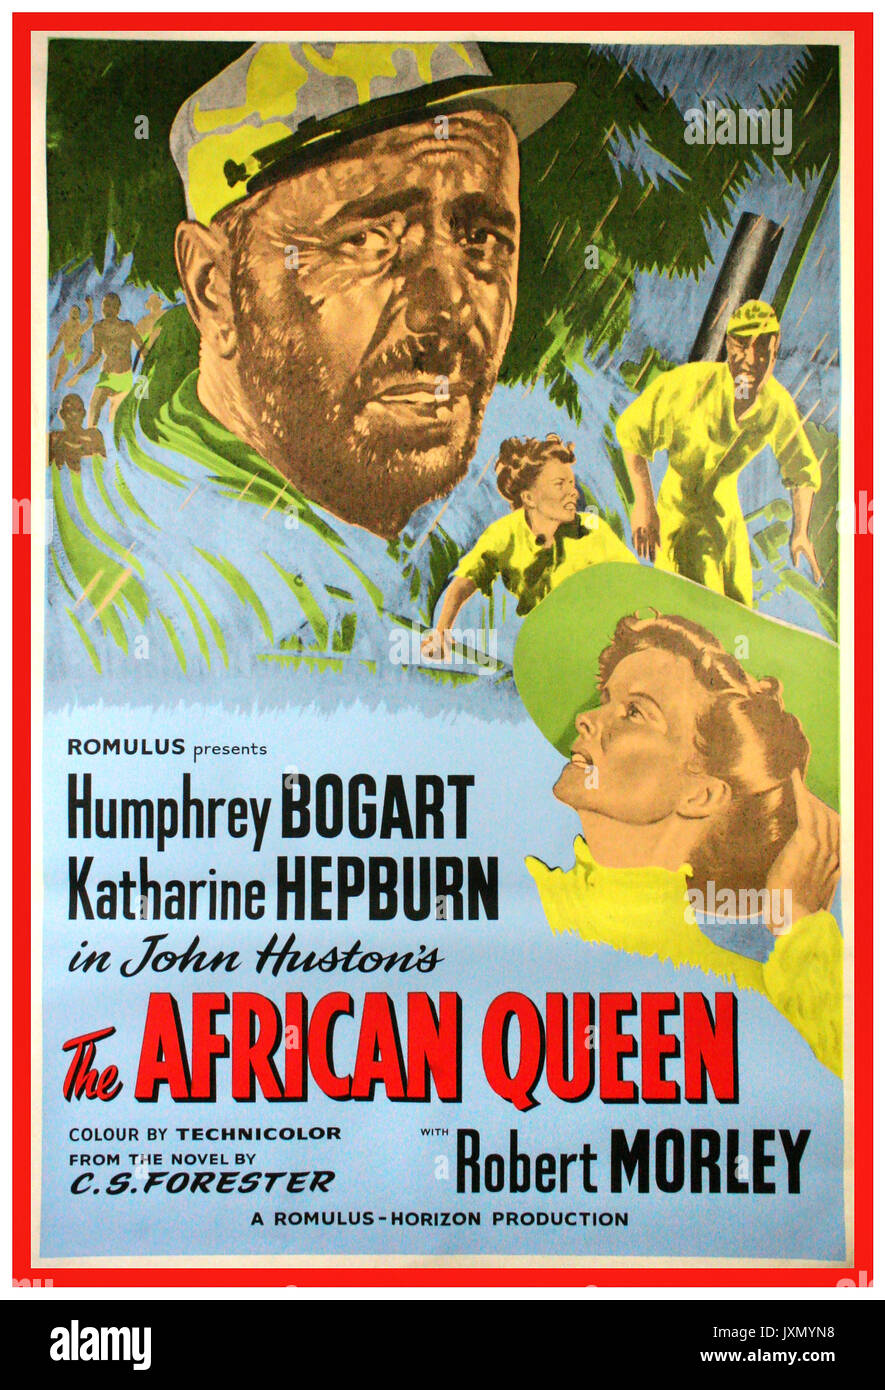 The African Queen, 1952. Vintage English Movie Poster mid 50’s. Starring Humphrey Bogart and Katharine Hepburn co-starring Robert Morley Hollywood classic  directed by John Huston and set in war contested German East Africa. Original movie film poster Stock Photo